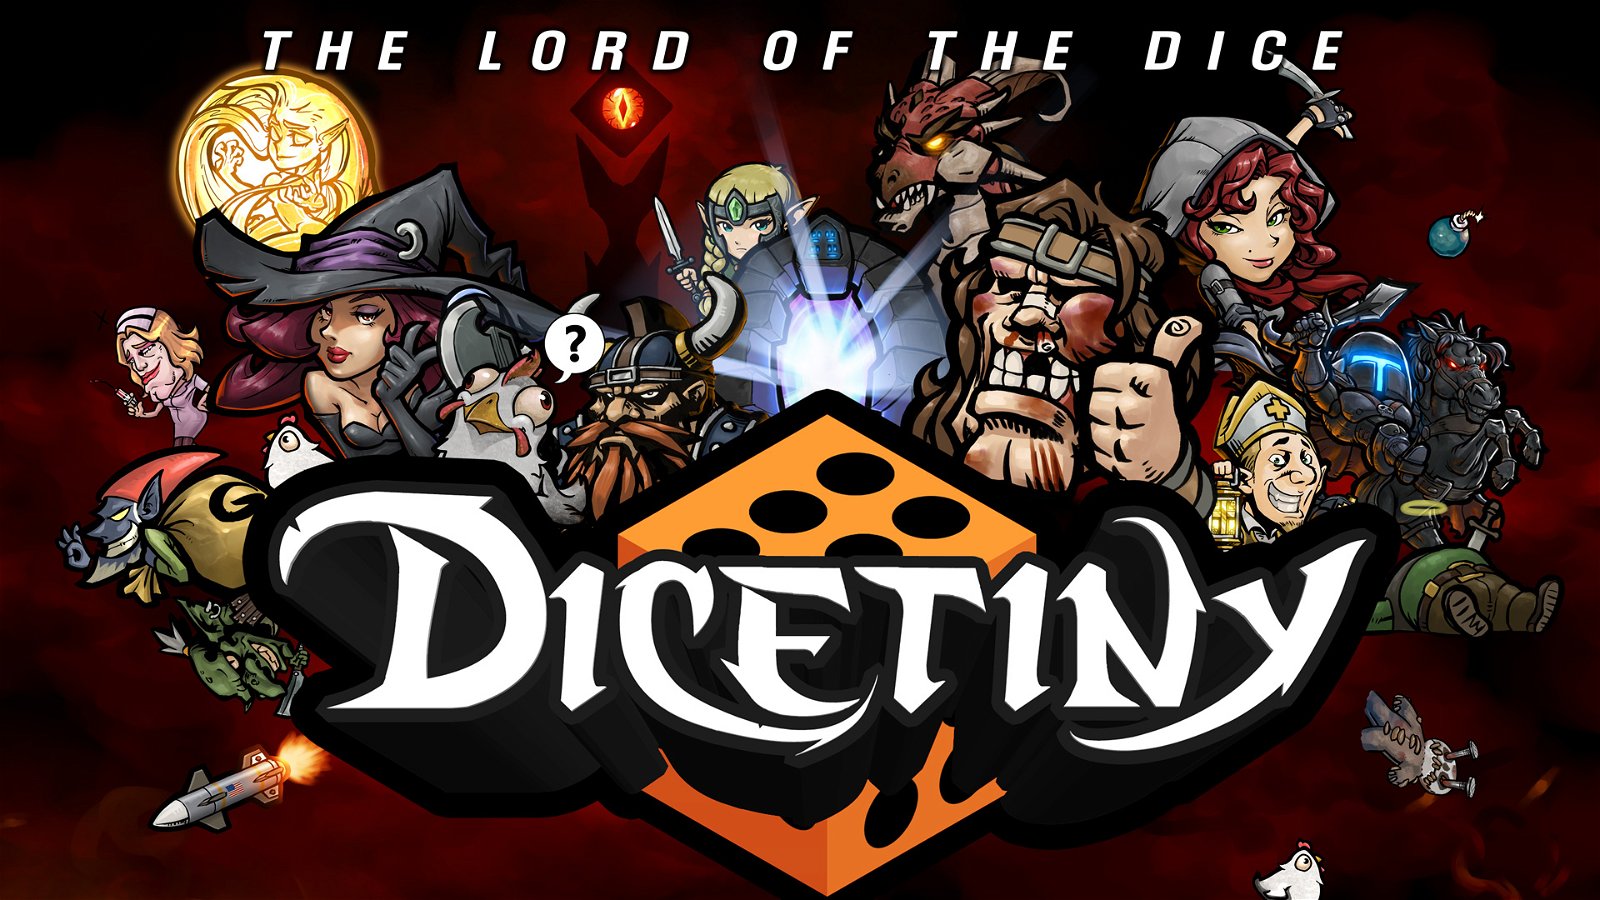 Image of DICETINY: The Lord of the Dice